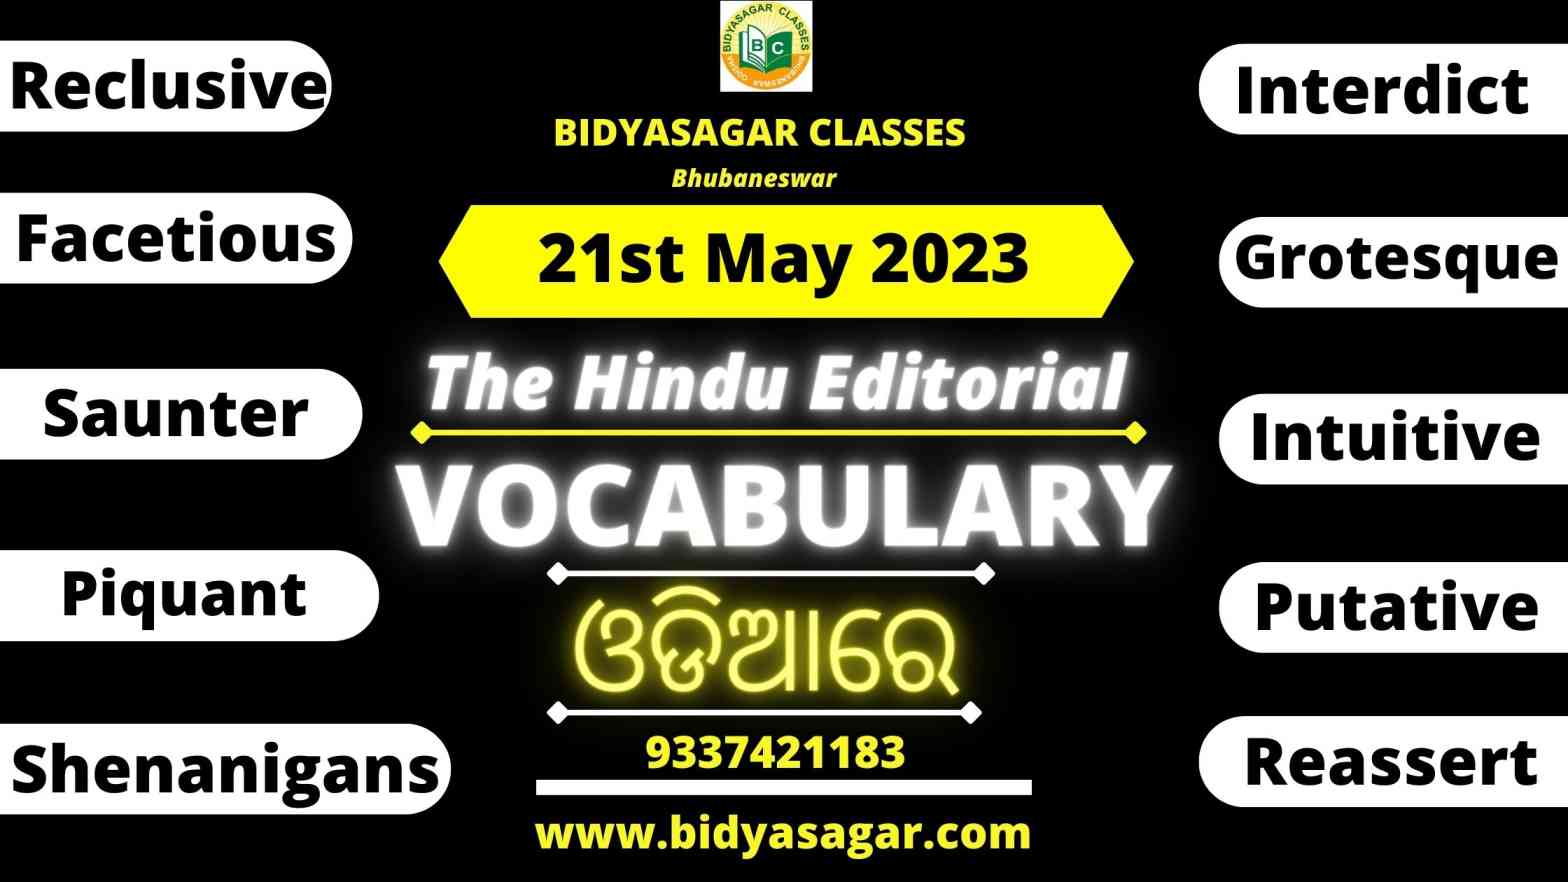 The Hindu Editorial Vocabulary of 21st May 2023